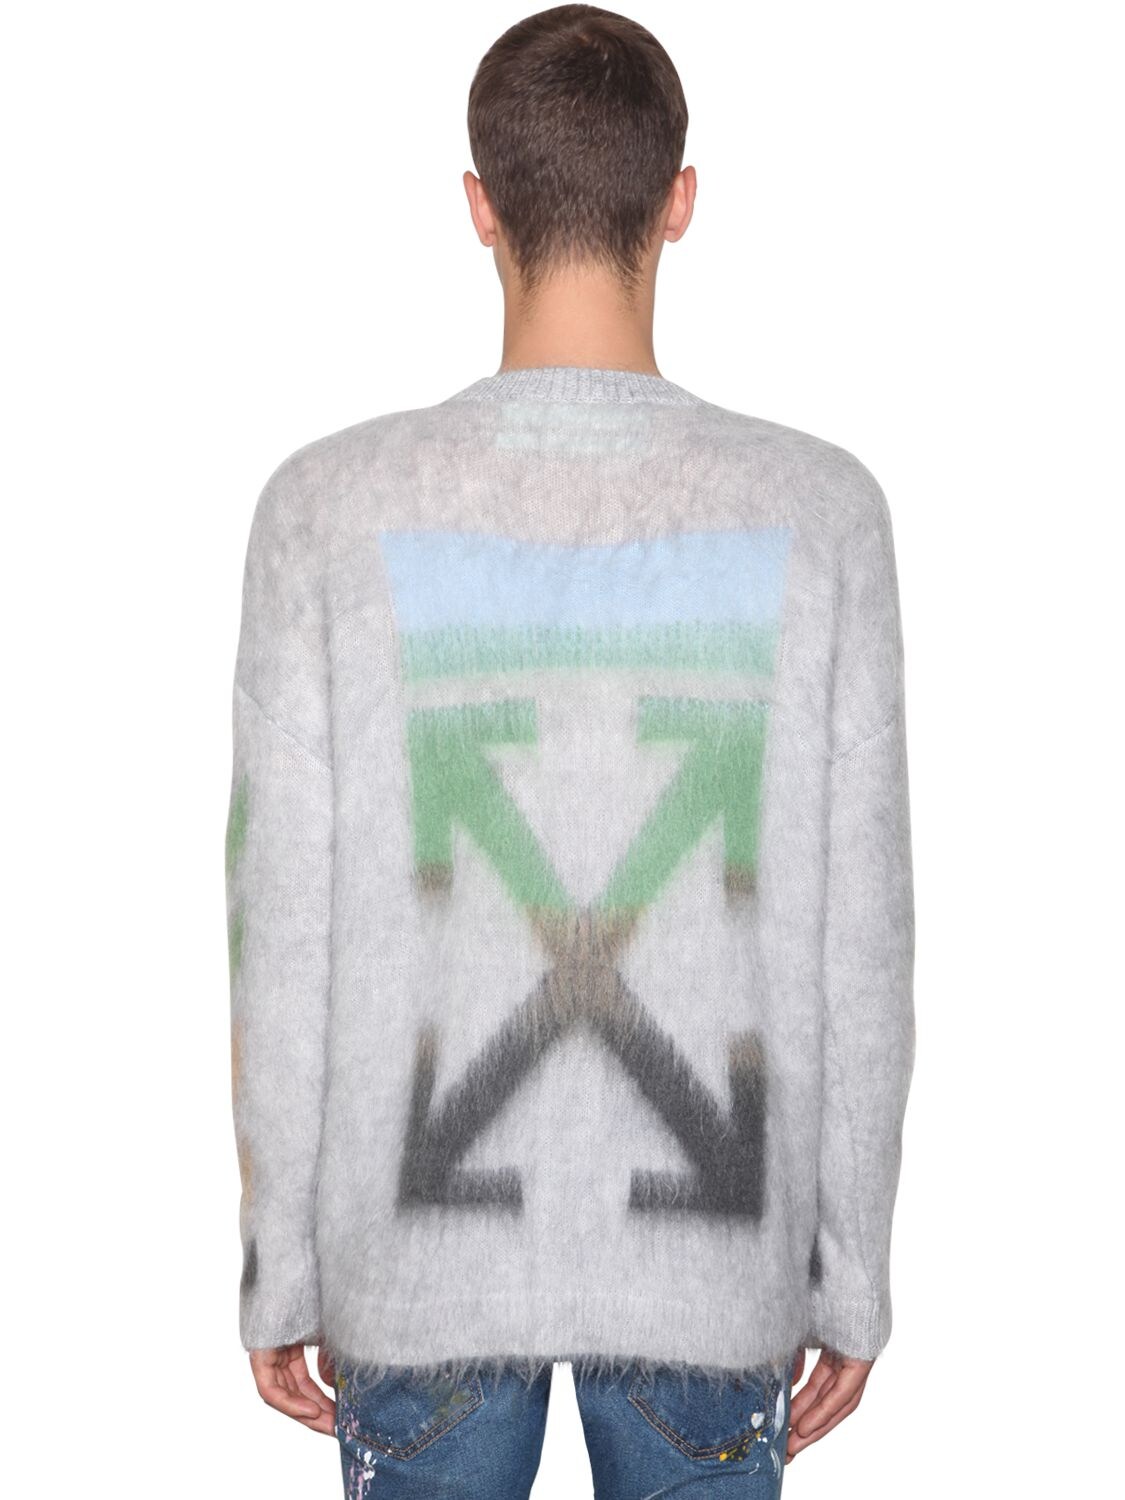 OFF-WHITE DIAG BRUSHED MOHAIR BLEND KNIT jumper,69ILFA025-MDC4OA2